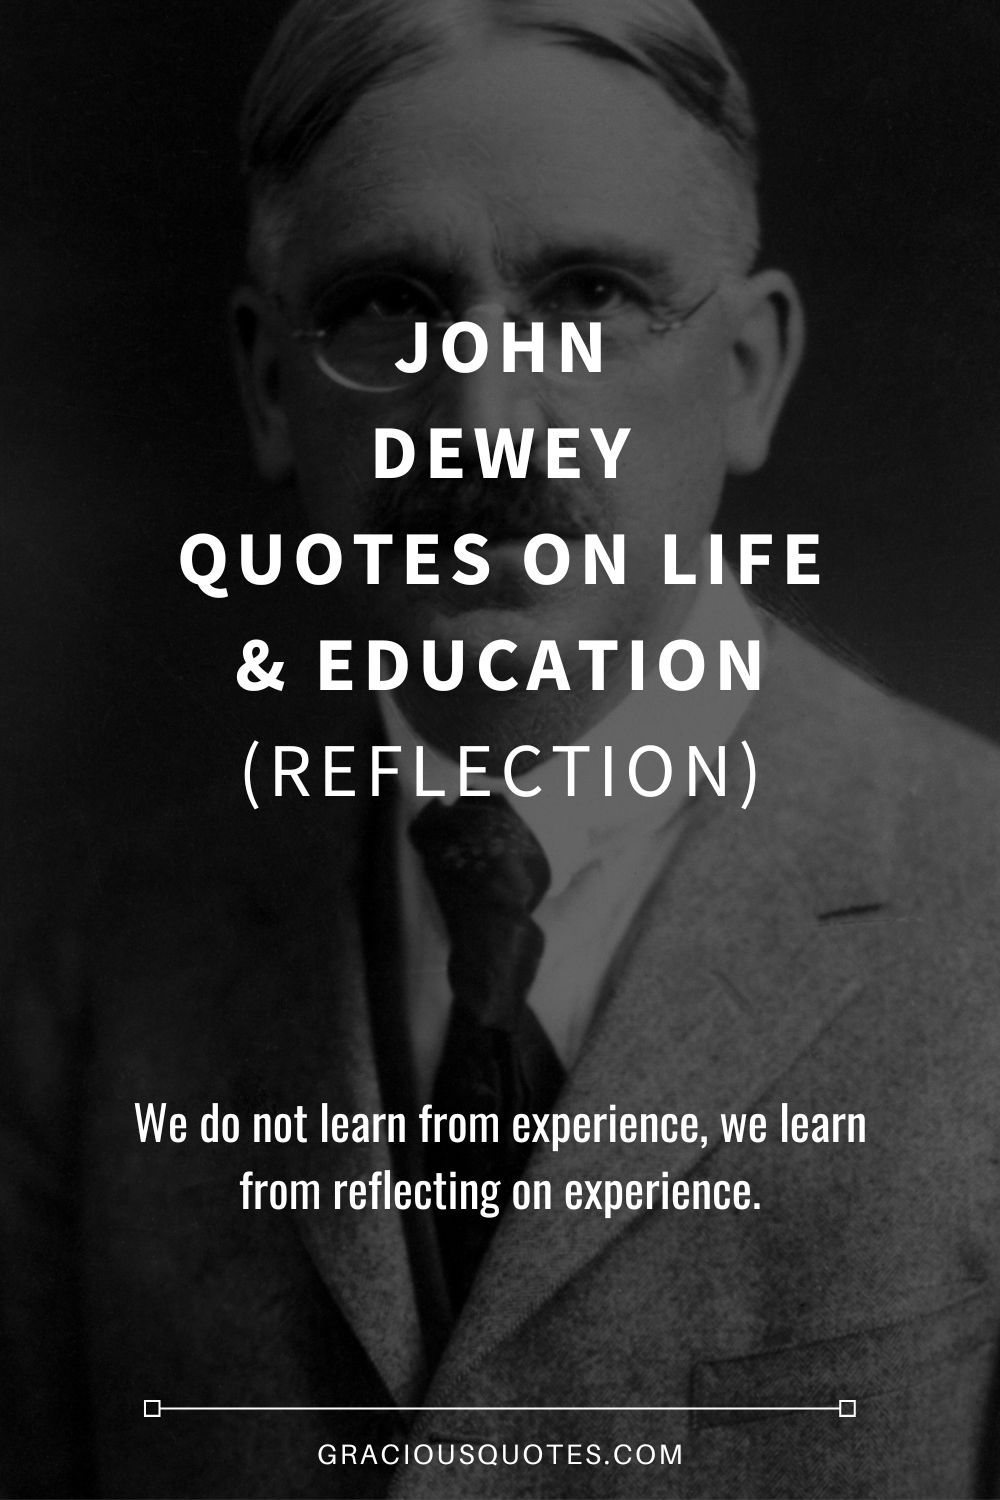 John Dewey Quotes on Life & Education (REFLECTION) - Gracious Quotes